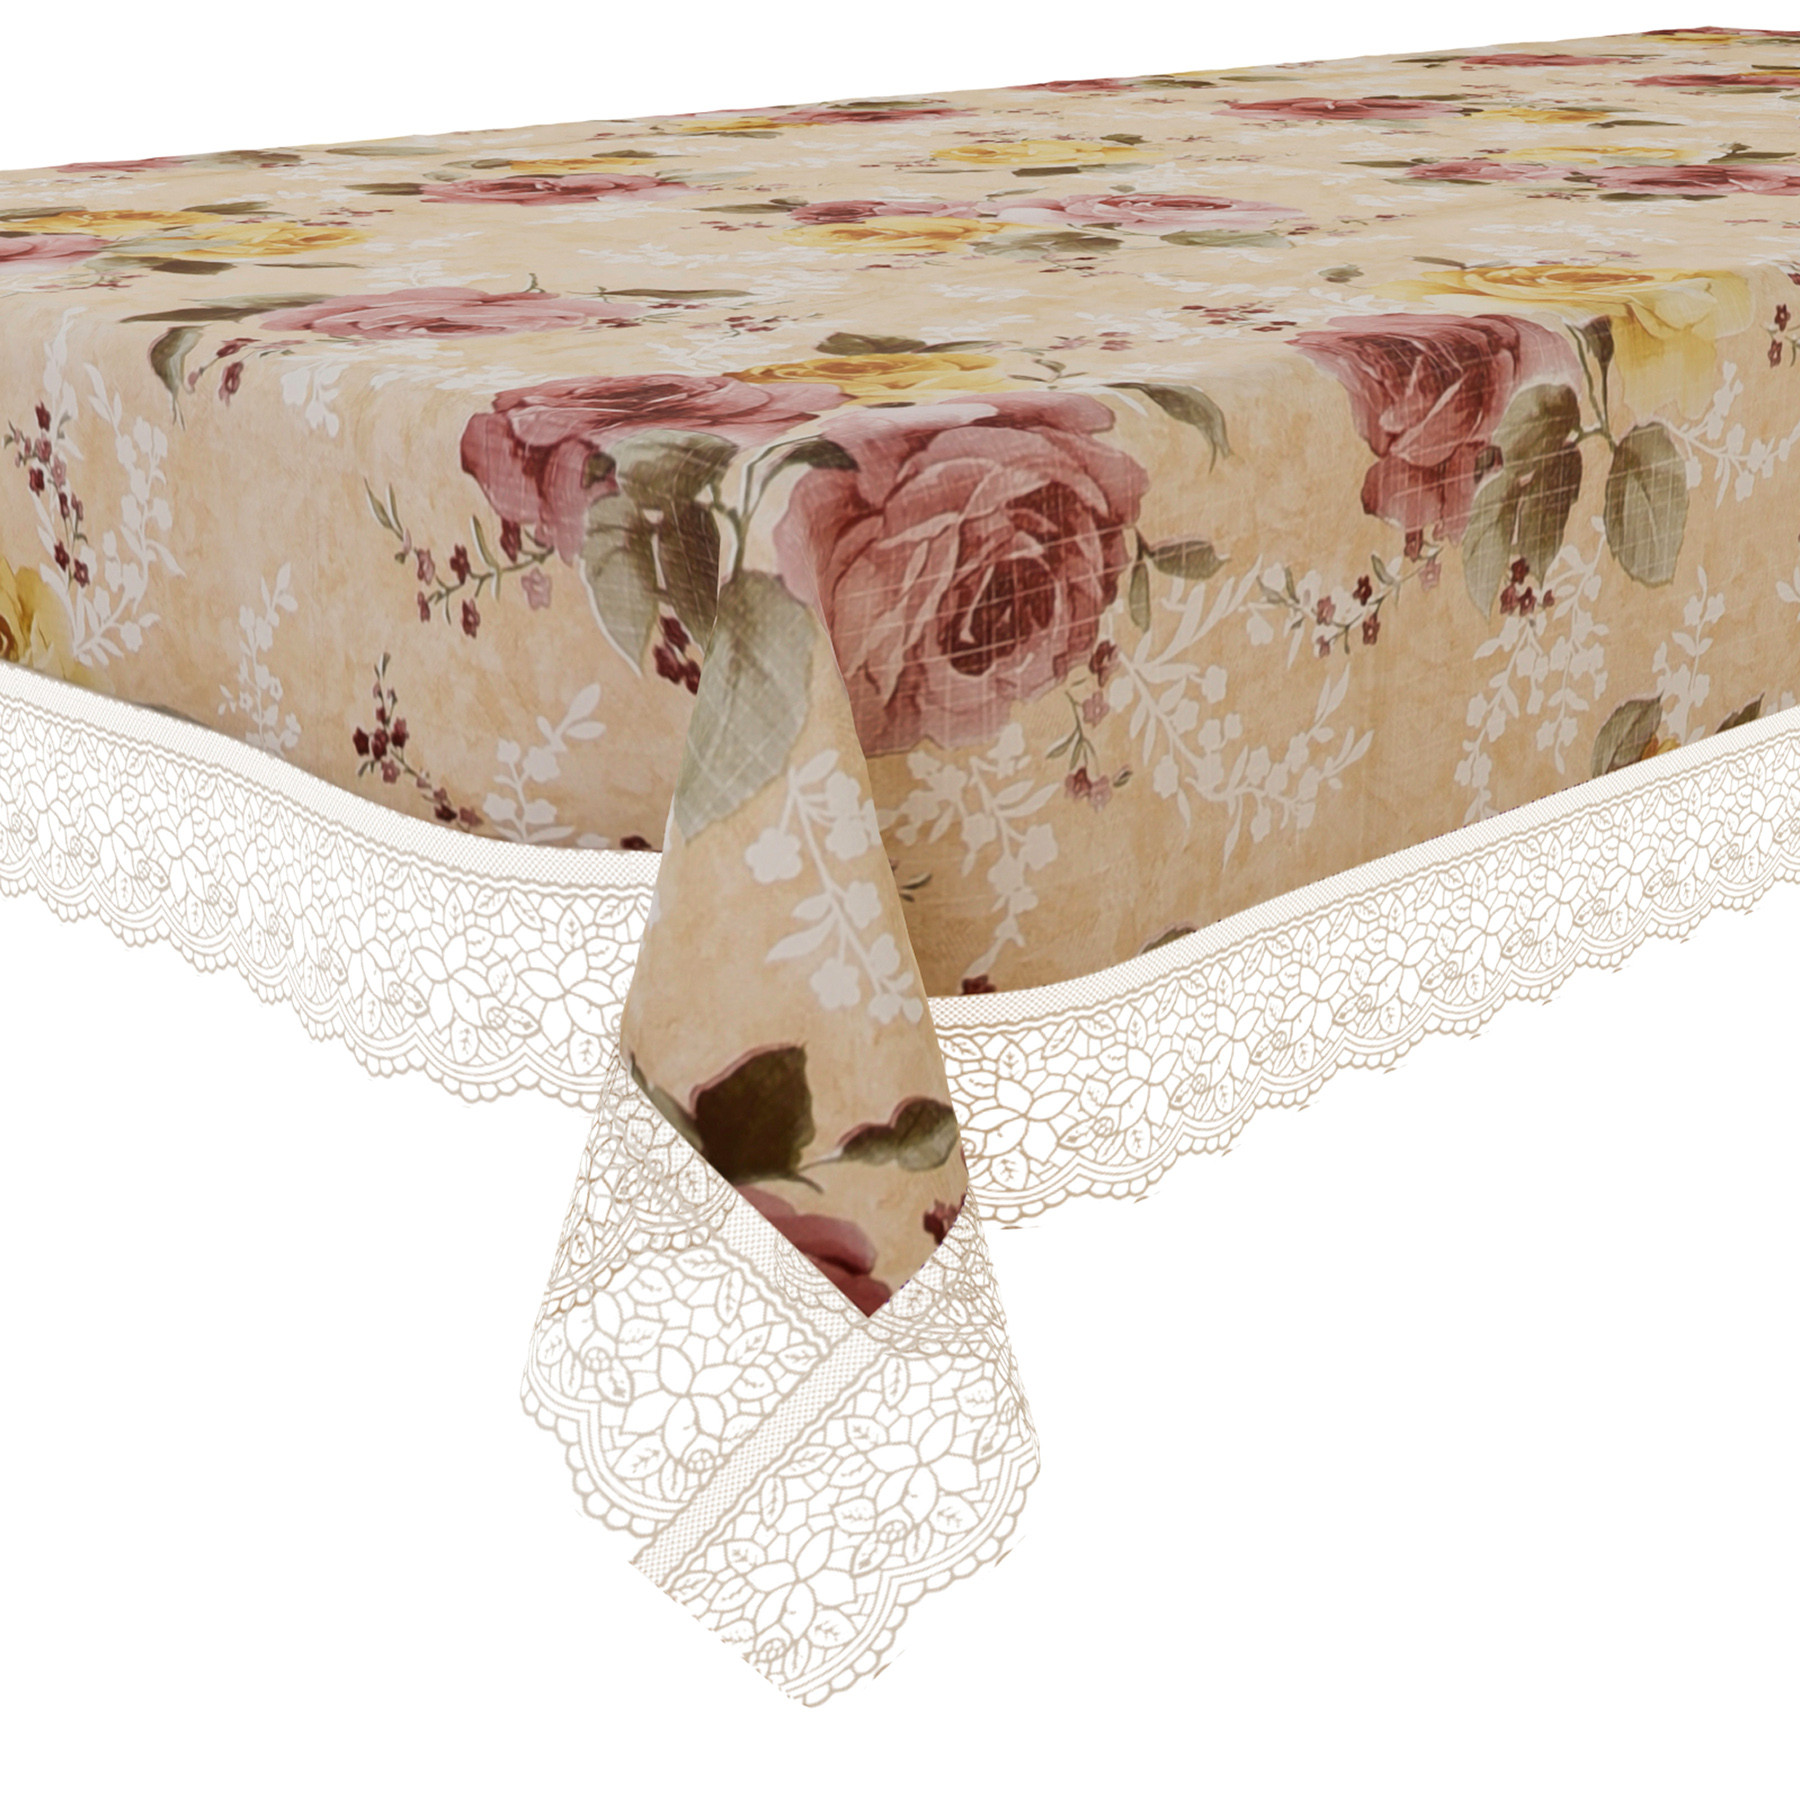 Kuber Industries Center Table Cover | PVC Table Cover | Reusable Cloth Cover for Table Top | Flower Design Center Table Cover | Table Protector Cover | 40x60 Inch | Beige